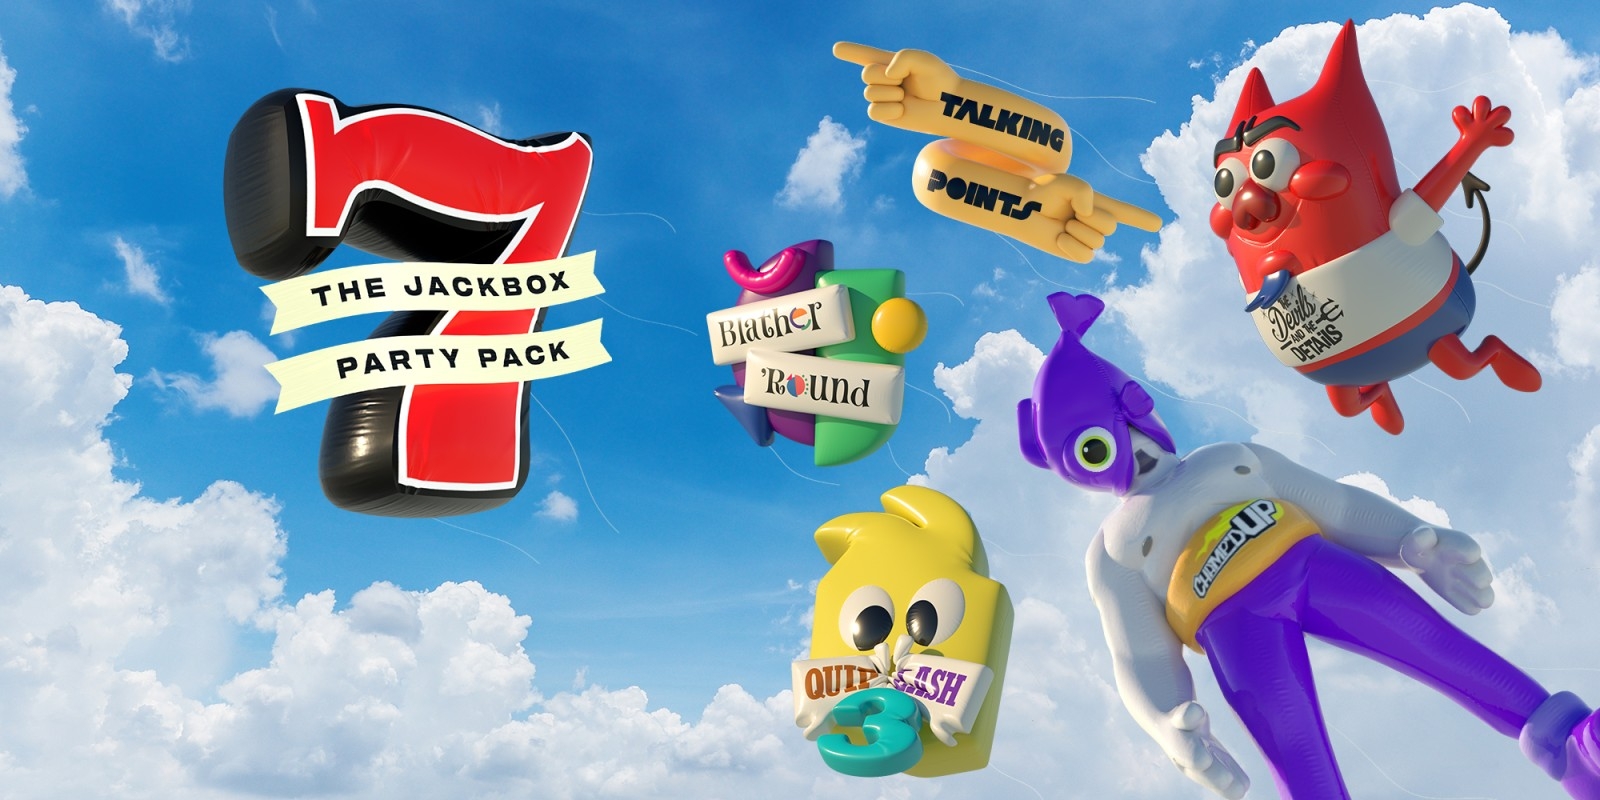 the jackbox party pack 7 price